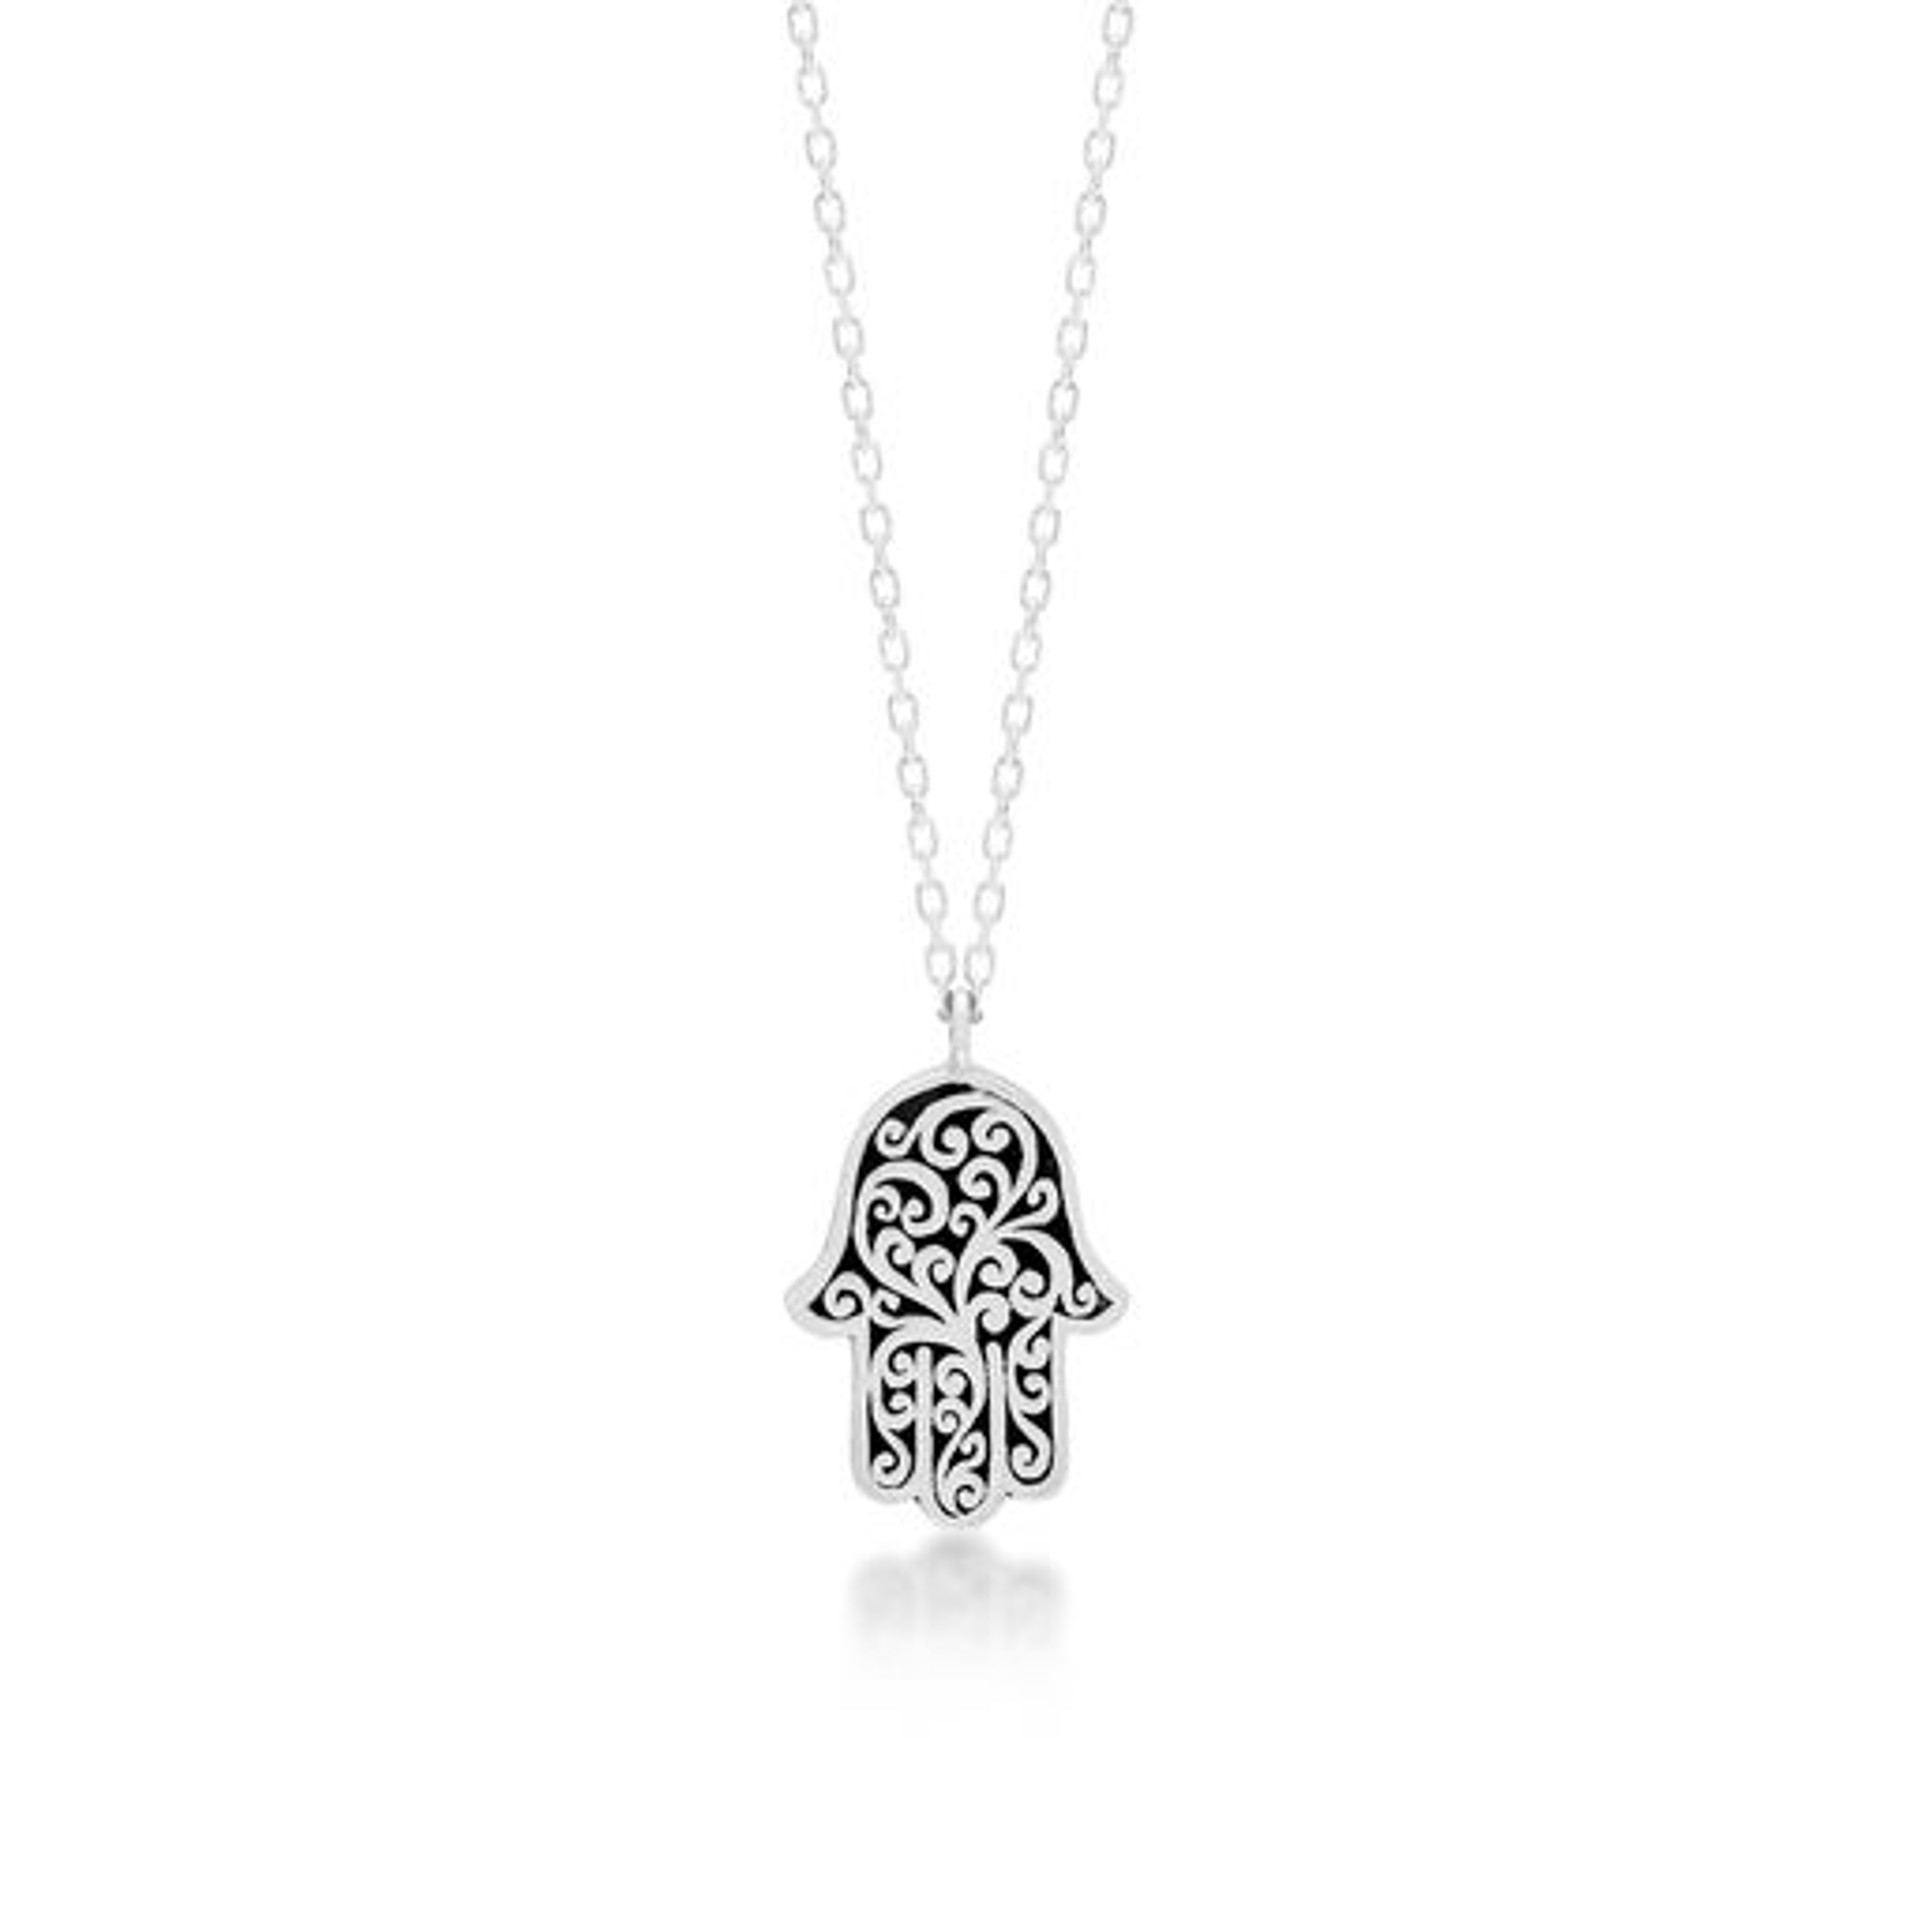 6979 Signature Scroll Hamsa Pendant Necklace by Lois Hill